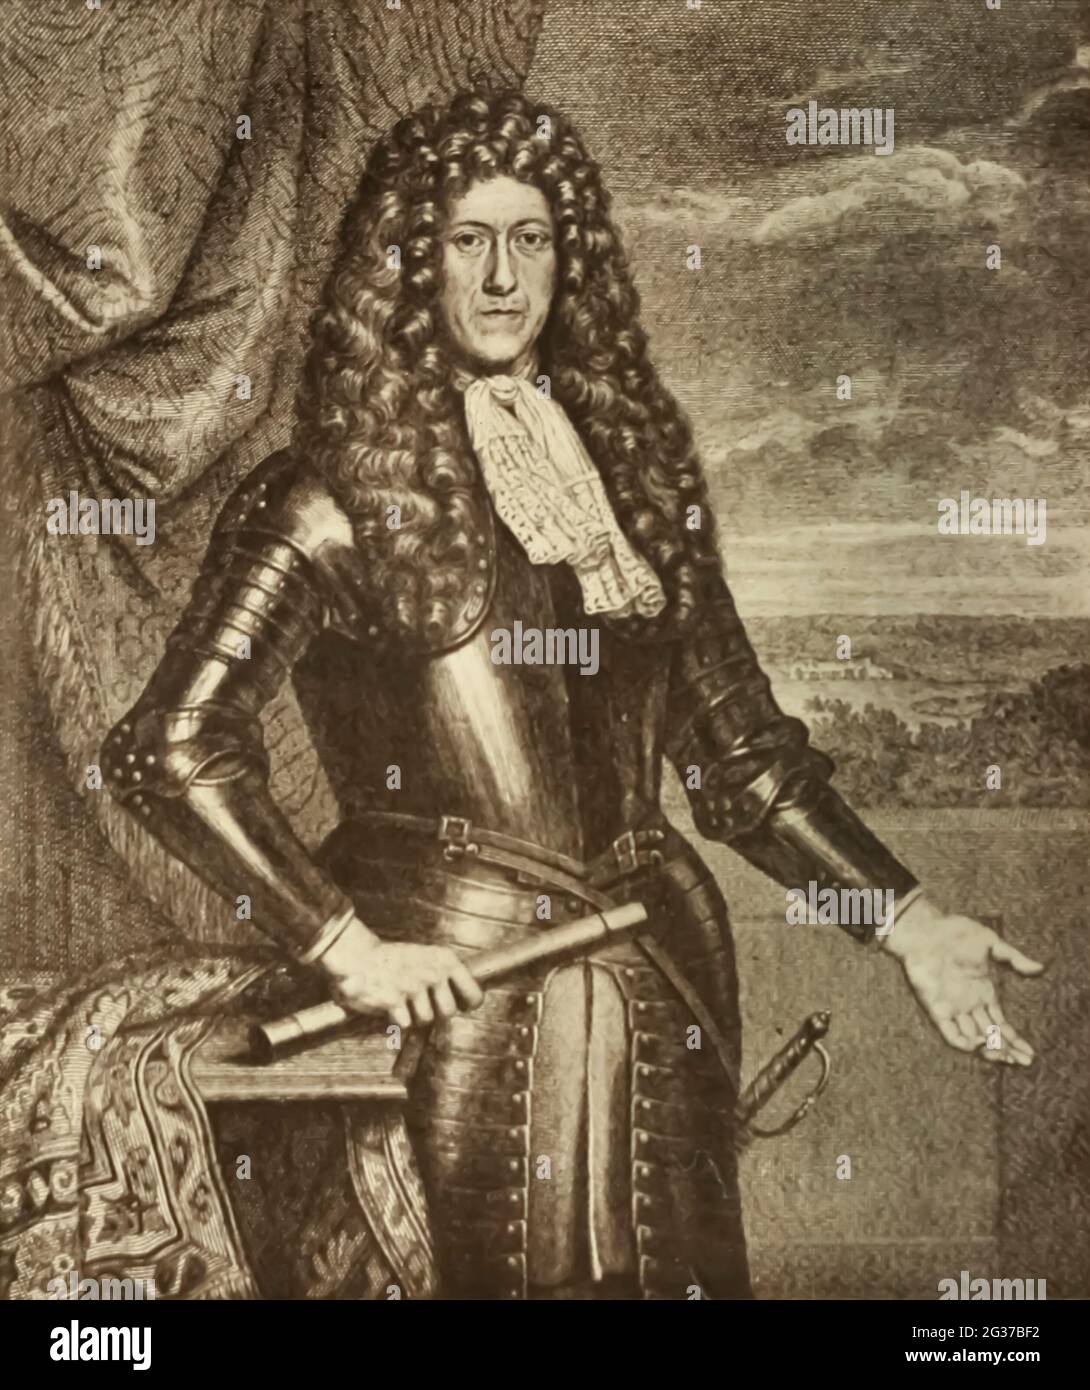 Hendrik van Rheede [Hendrik Adriaan van Rheede tot Drakenstein (Amsterdam, 13 April 1636 – at sea, 15 December 1691) was a military man and a colonial administrator of the Dutch East India Company and naturalist. Between 1669 and 1676 he served as a governor of Dutch Malabar and employed twenty-five people on his book Hortus Malabaricus, describing 740 plants in the region. As Lord of Mydrecht, he also played a role in the governance of the Cape colonies]. From the Book  ' Old Cape Colony; a chronicle of her men and houses from 1652-1806 ' by Trotter, Alys Fane (Keatinge), Mrs Publication date Stock Photo